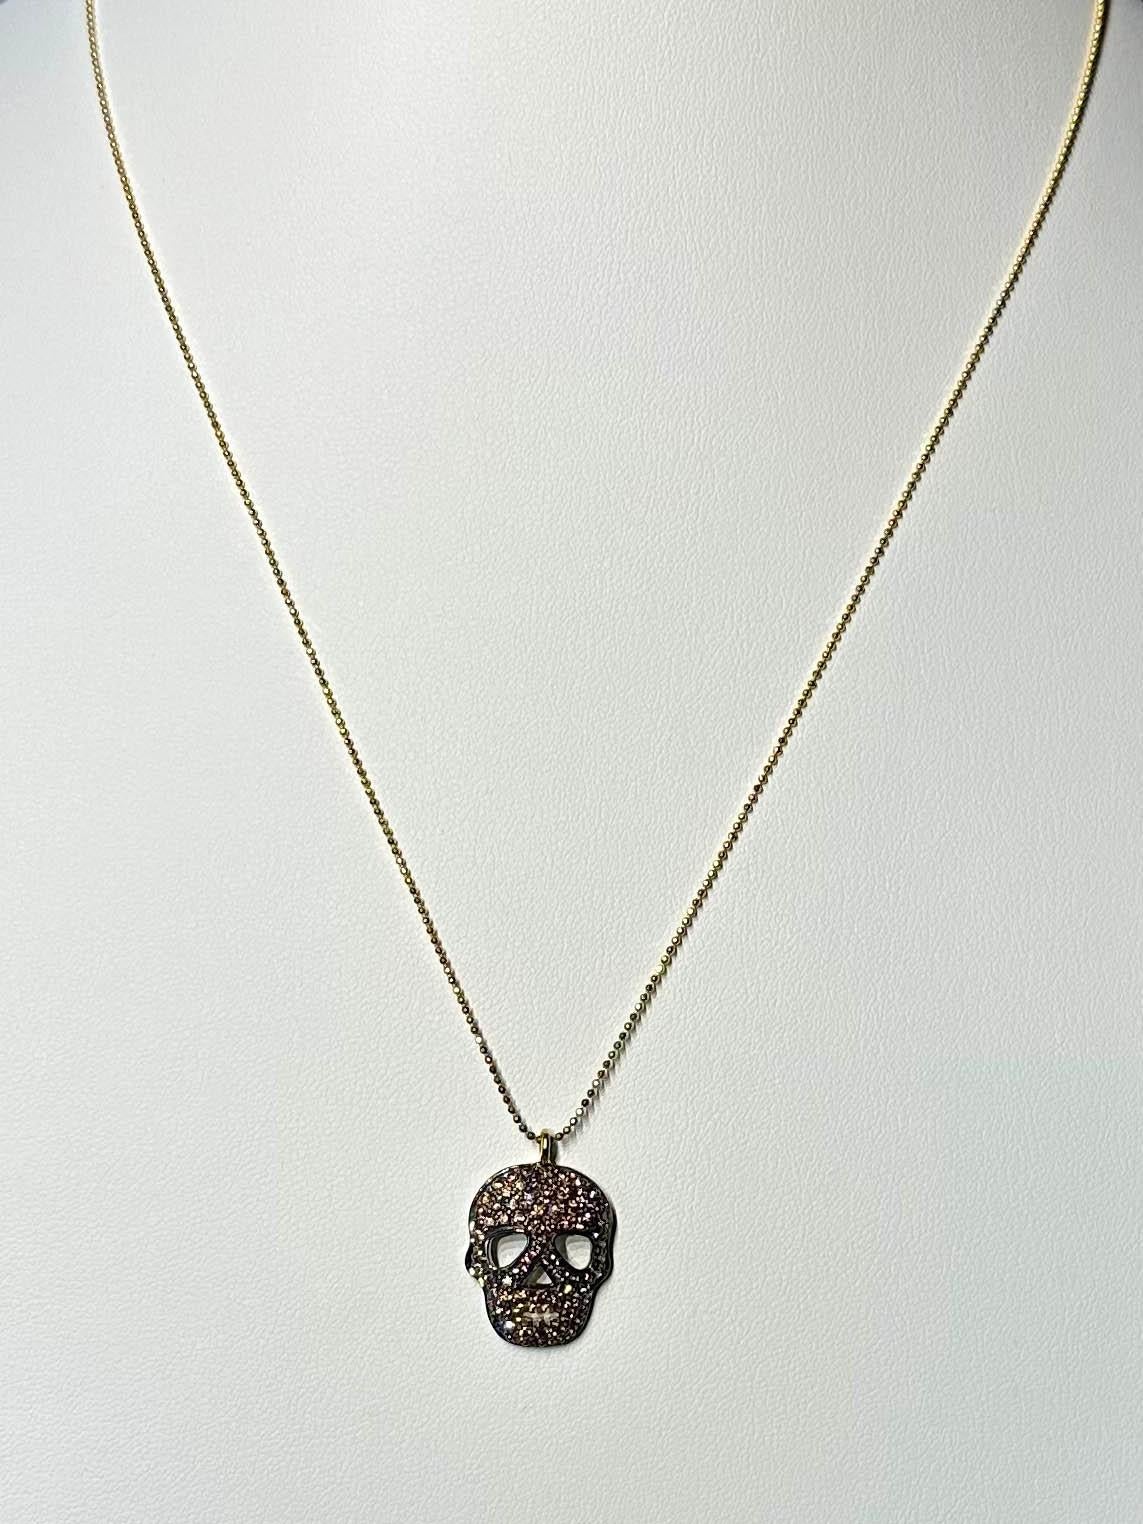 A Skull Pendant set with Brown Zircons in Blackened Silver For Sale 4